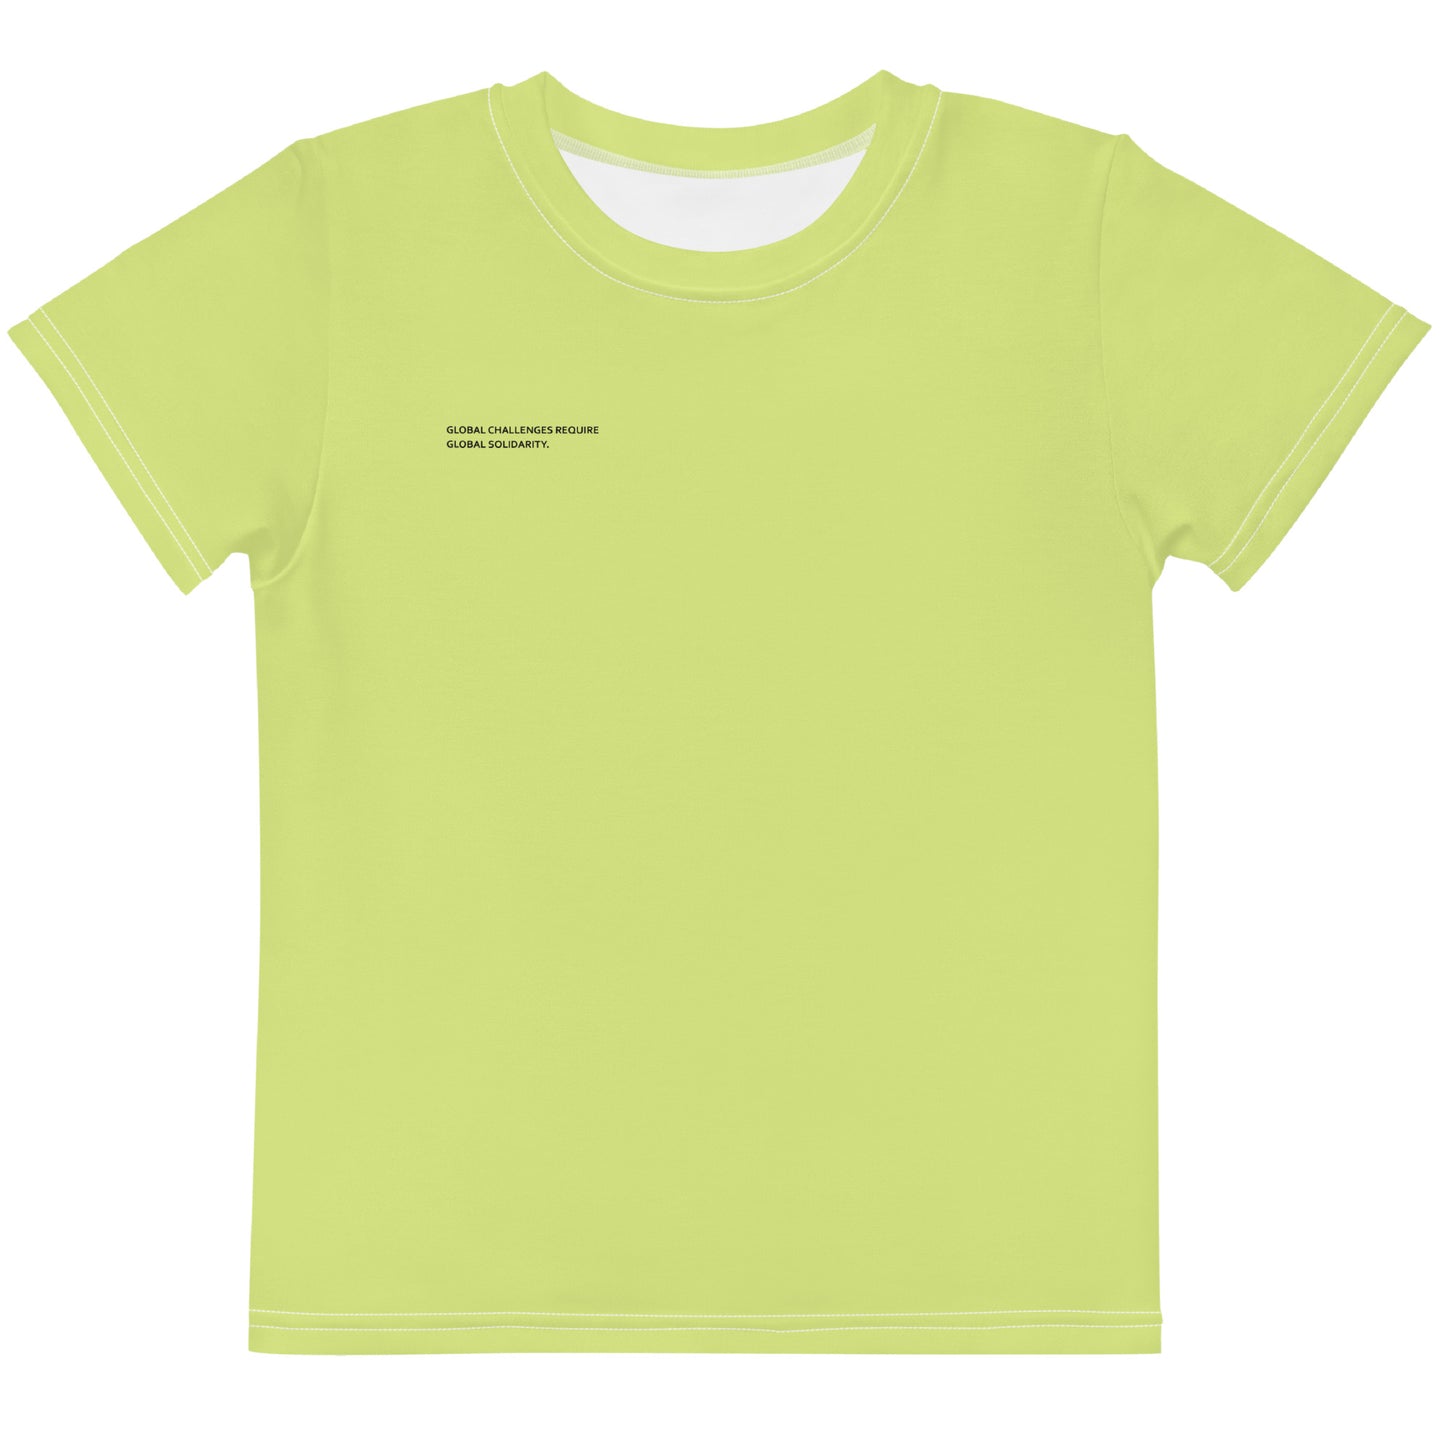 Lime Climate Change Global Warming Statement - Sustainably Made Kid's T-Shirt